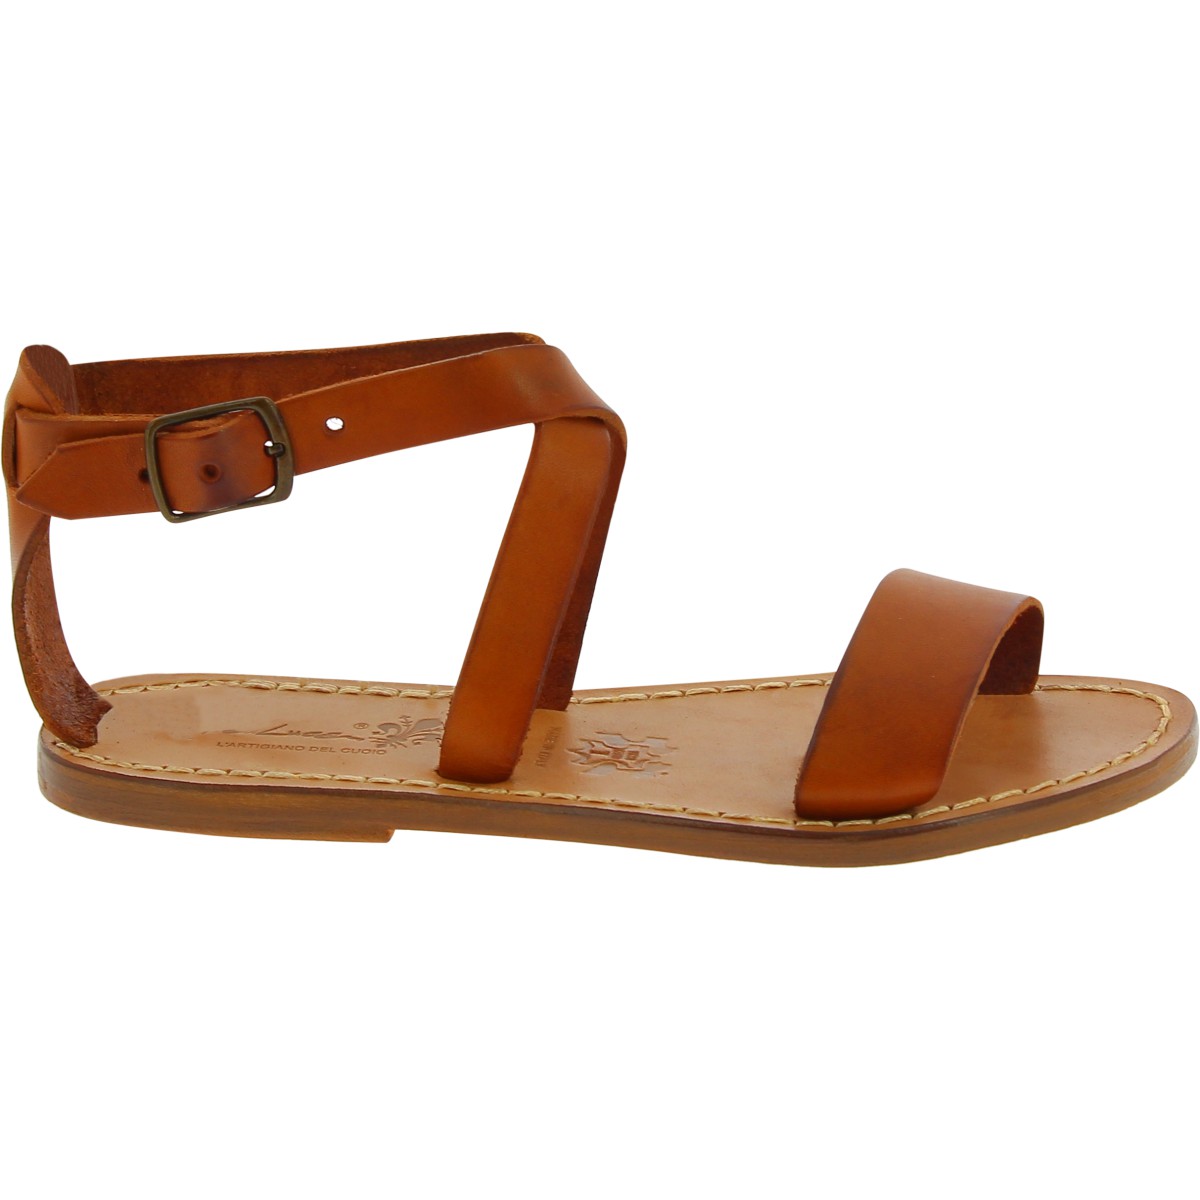 Women's sandals in tan leather handmade in Italy | The leather craftsmen